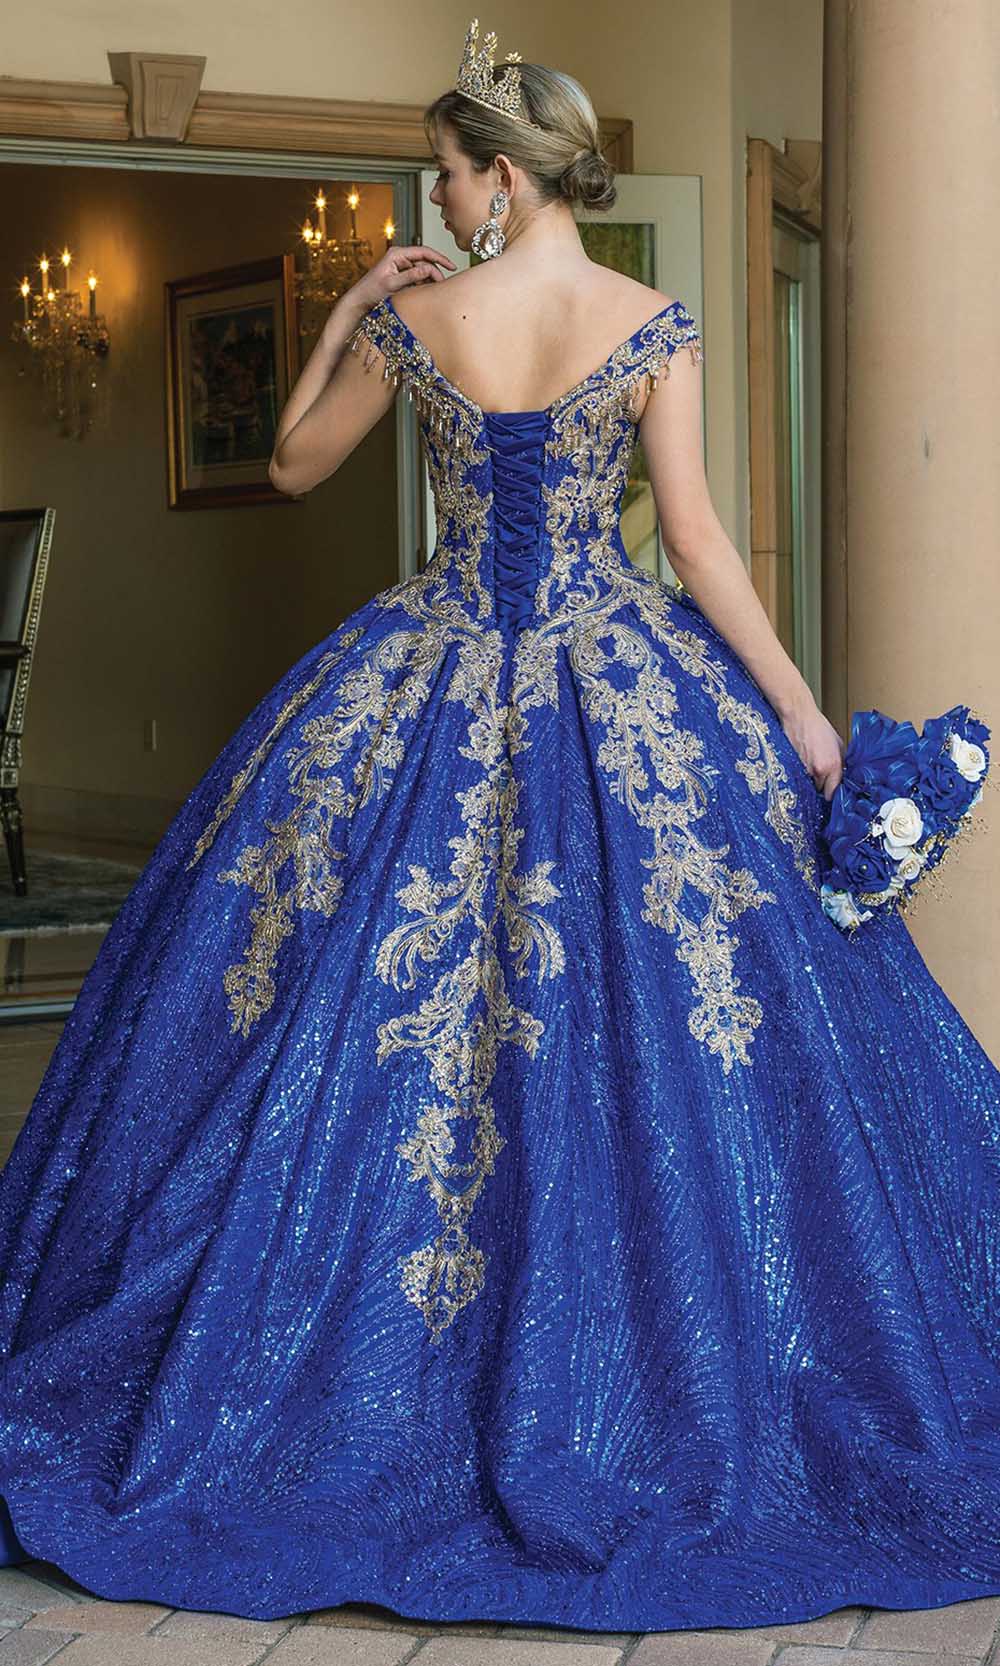 Dancing Queen - 1636 Dangling Beads Embellished Gown In Blue